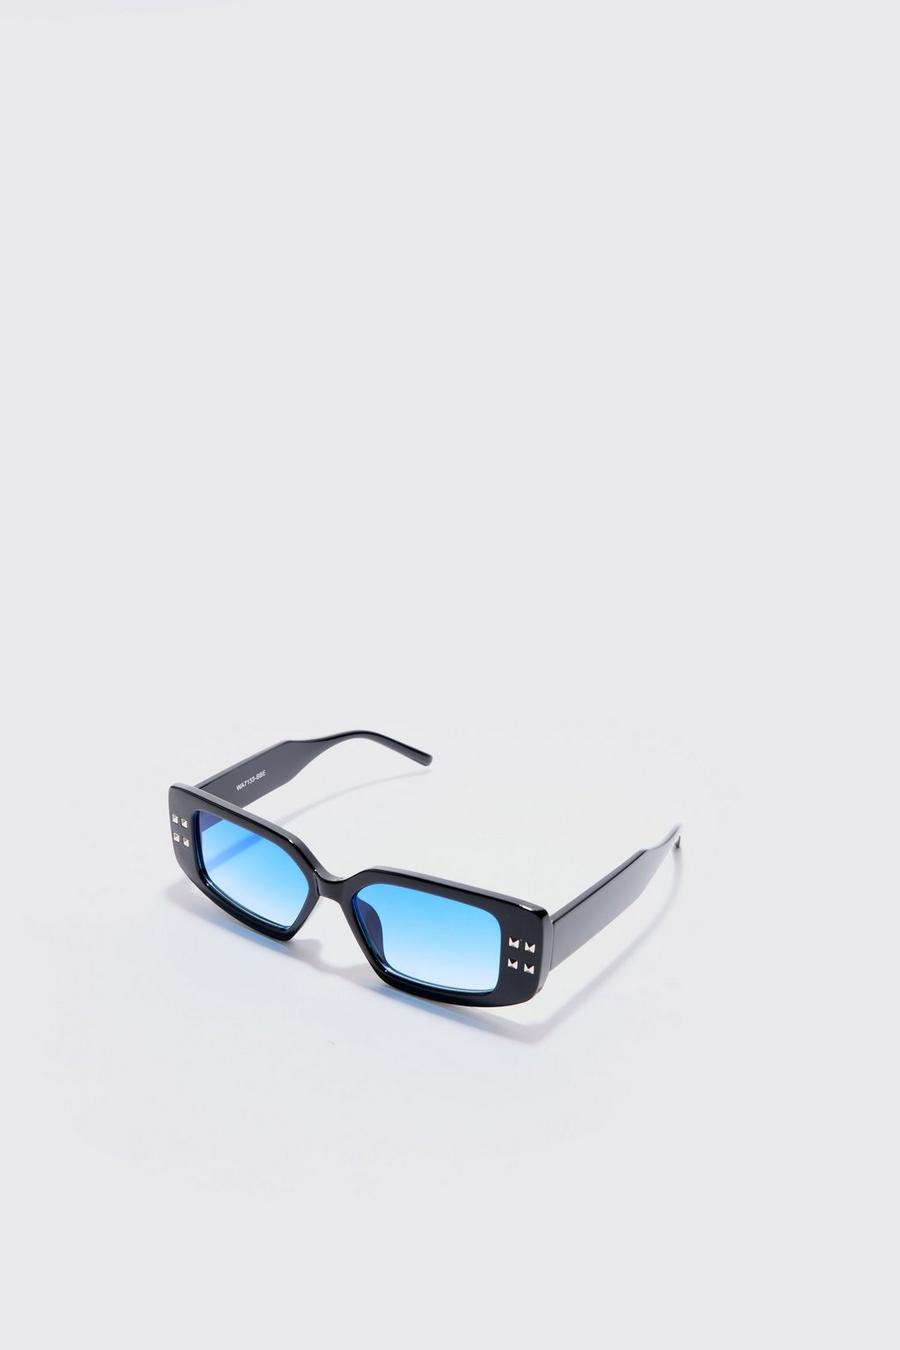 Chunky Rectangle Flat Sunglasses With Blue Lens In Black